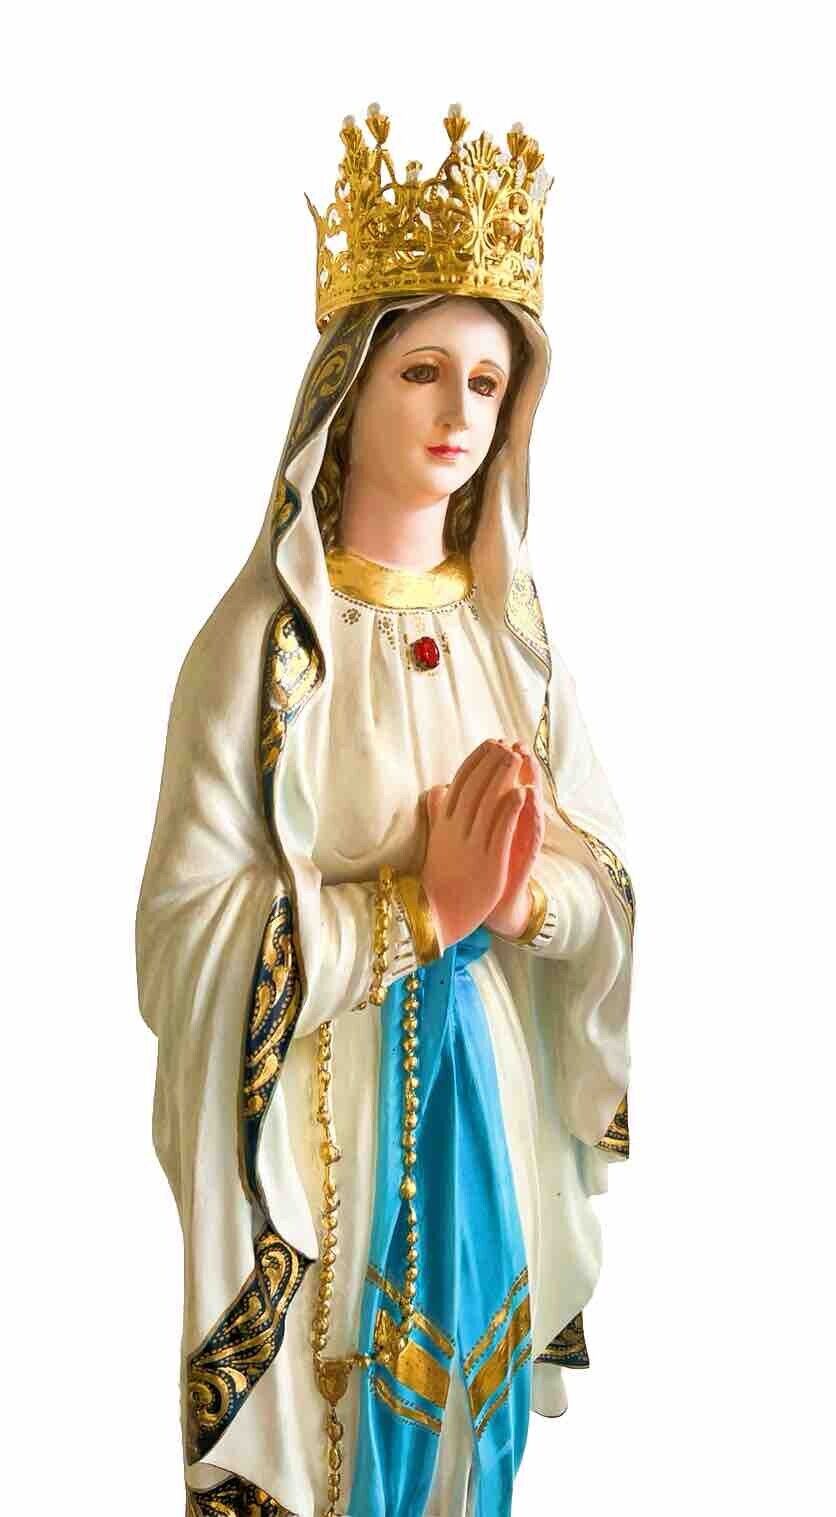 OUR LADY LOURDES LARGE 38” VIRGIN MARY STATUE GOLD CROWN JESUS MADONNA CATHOLIC